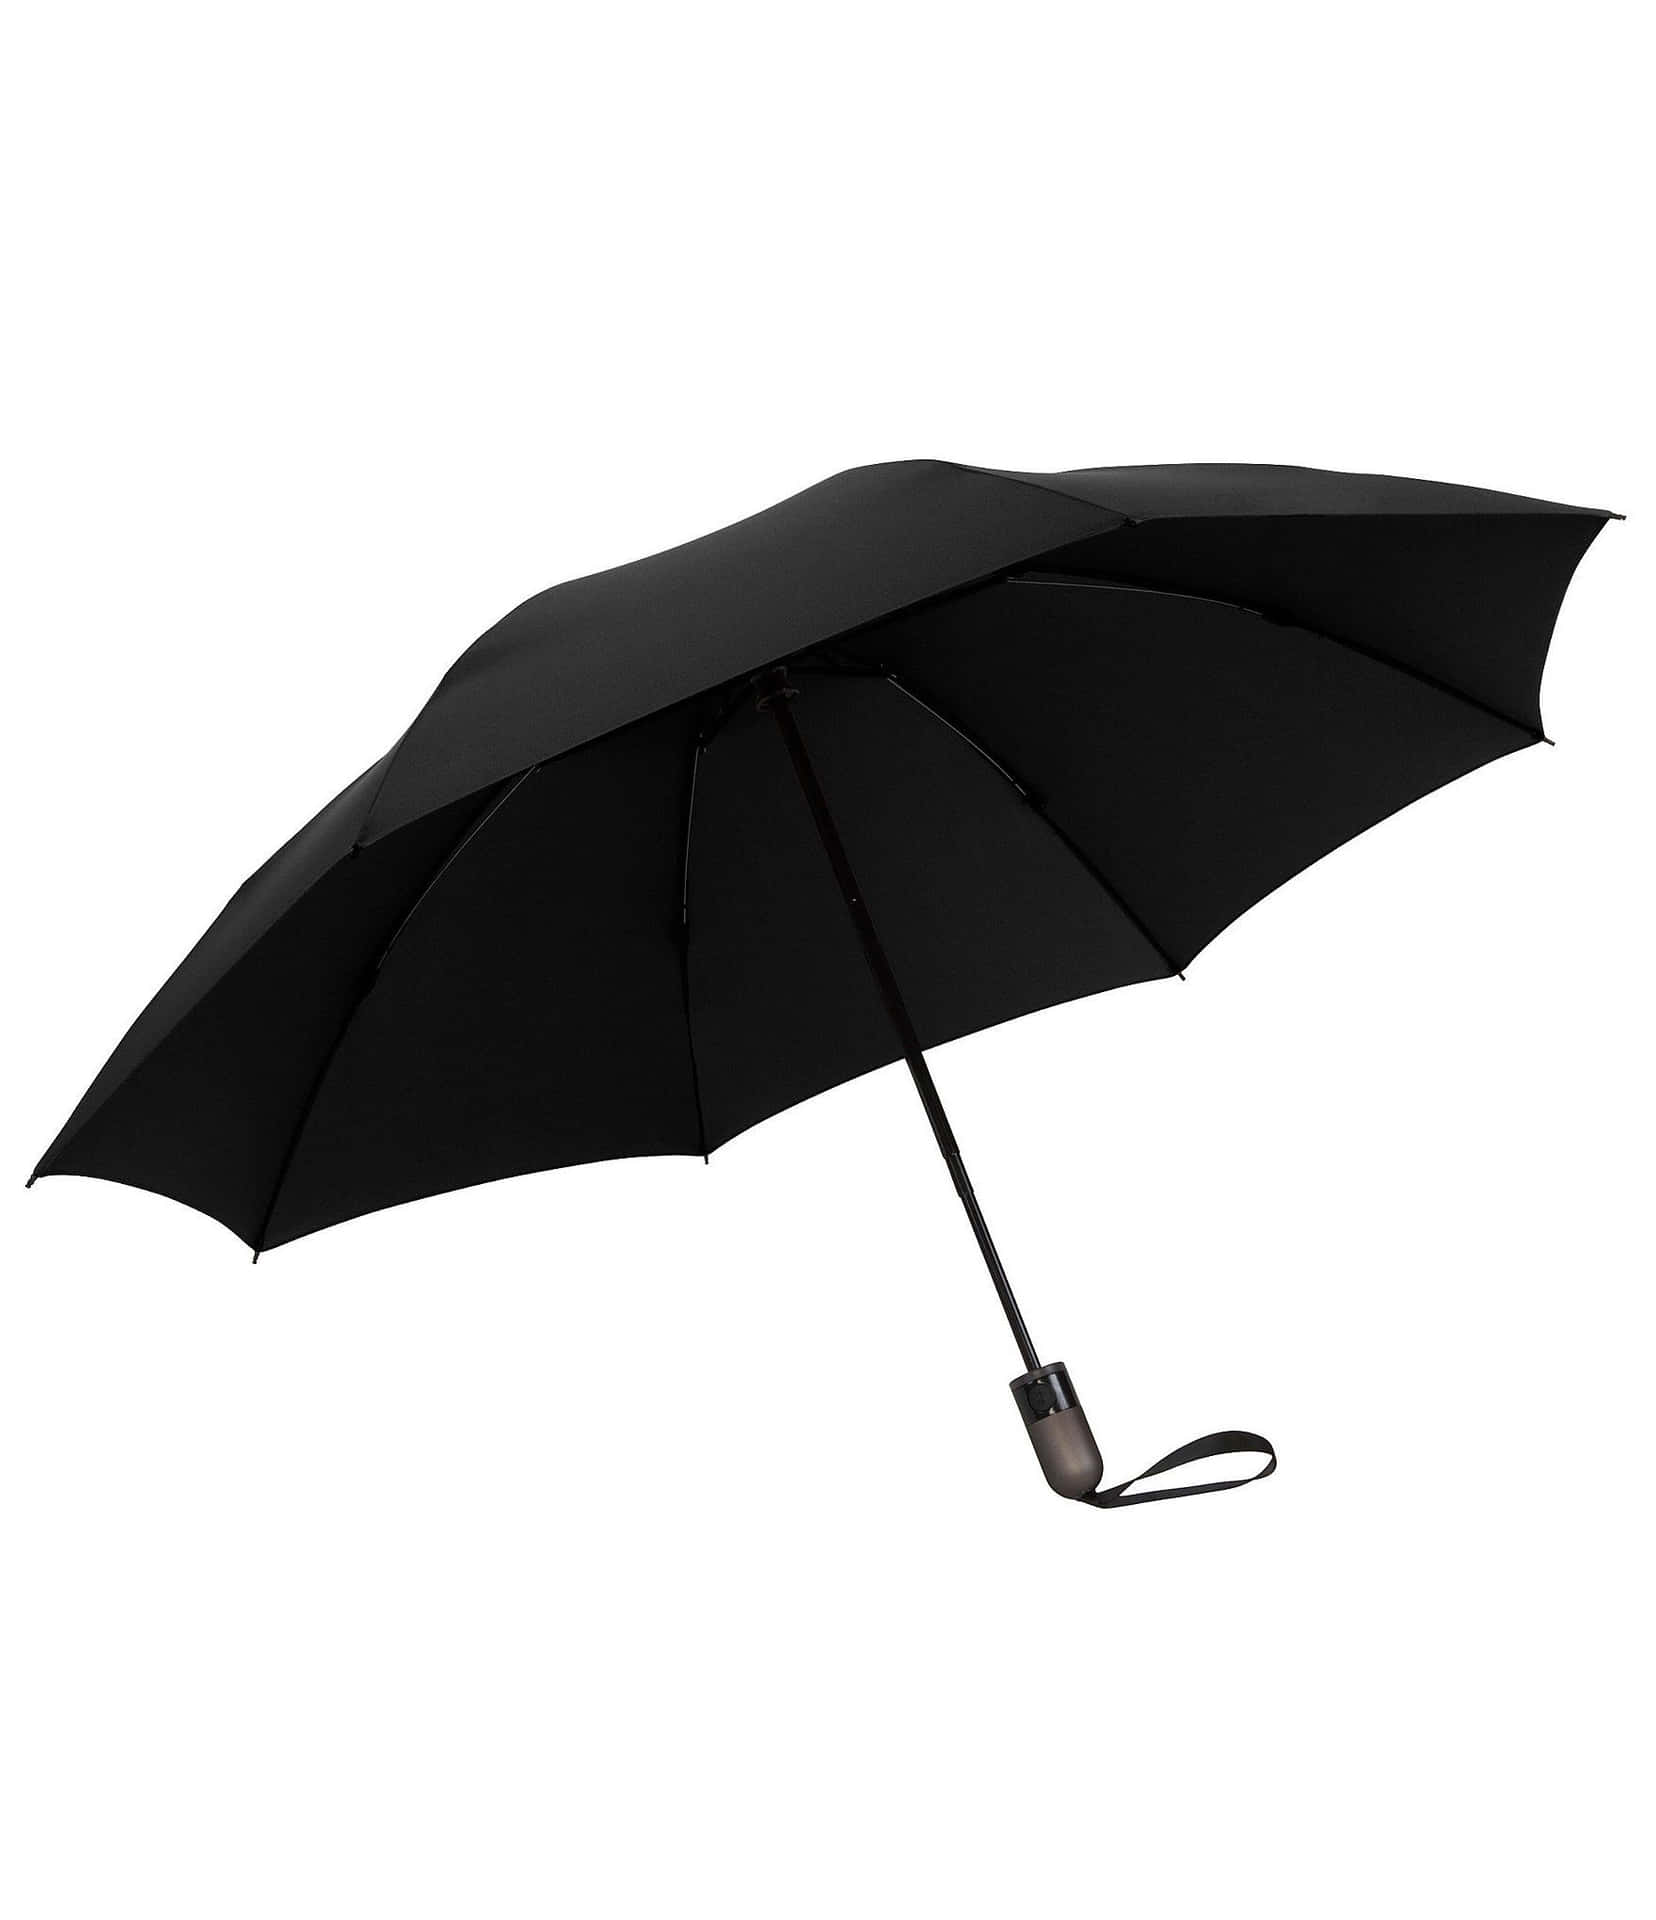 Protect yourself against the unpredictable weather with this classic umbrella